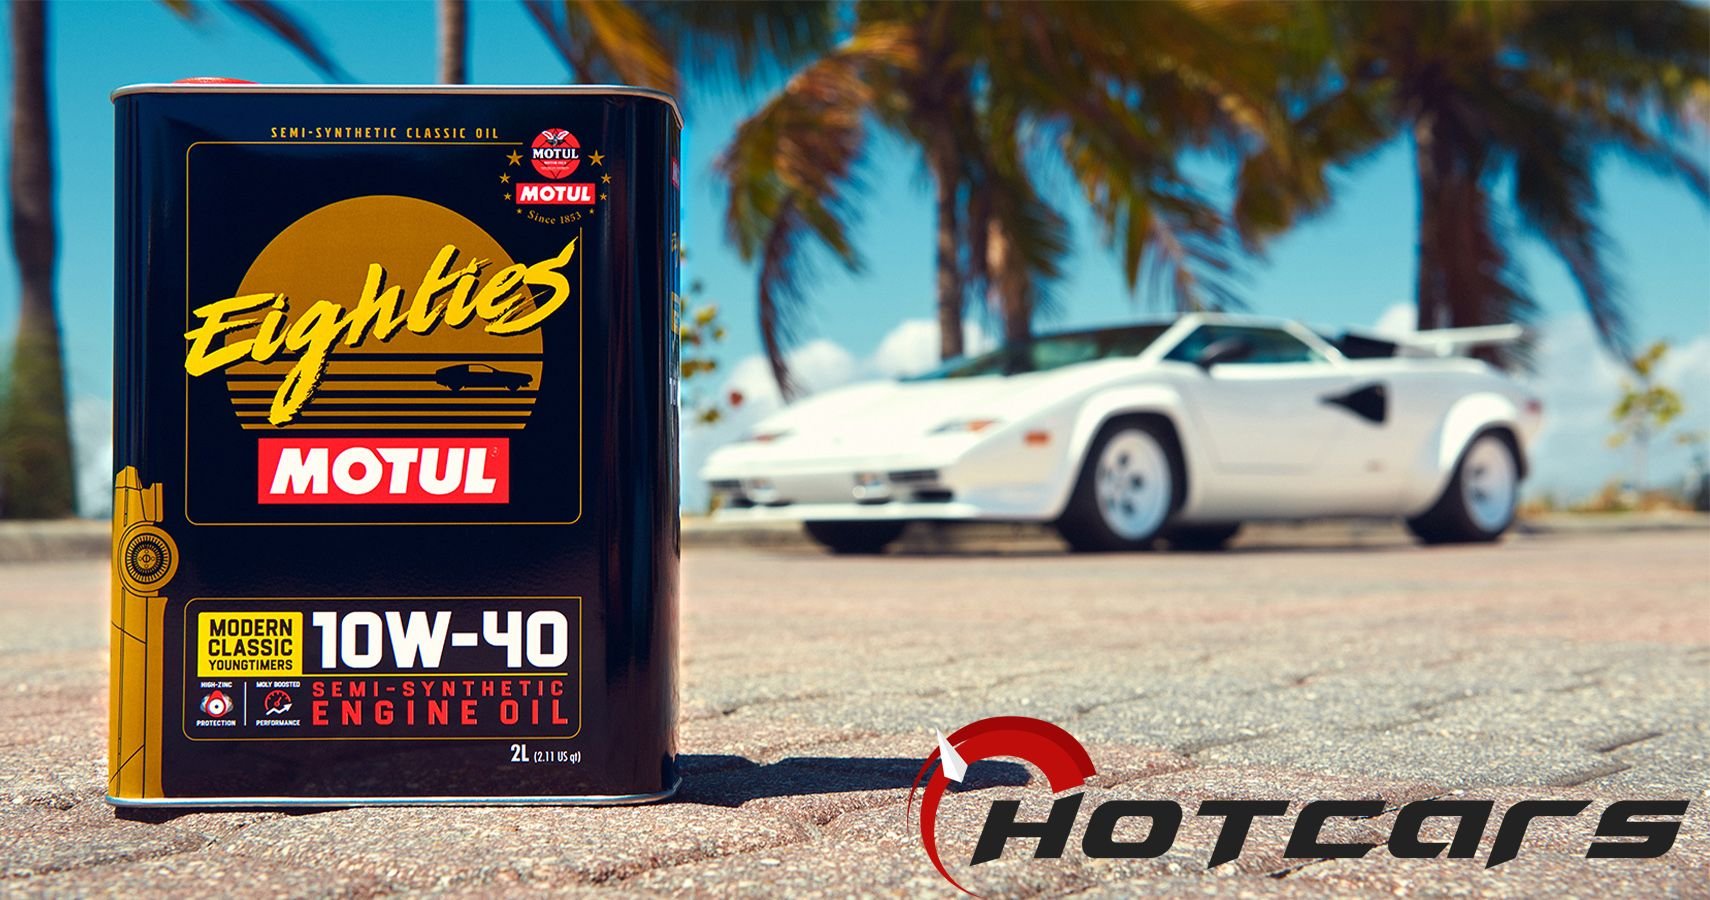 EXCLUSIVE: How Motul Developed New Classic Line Oils For The American Enthusiast